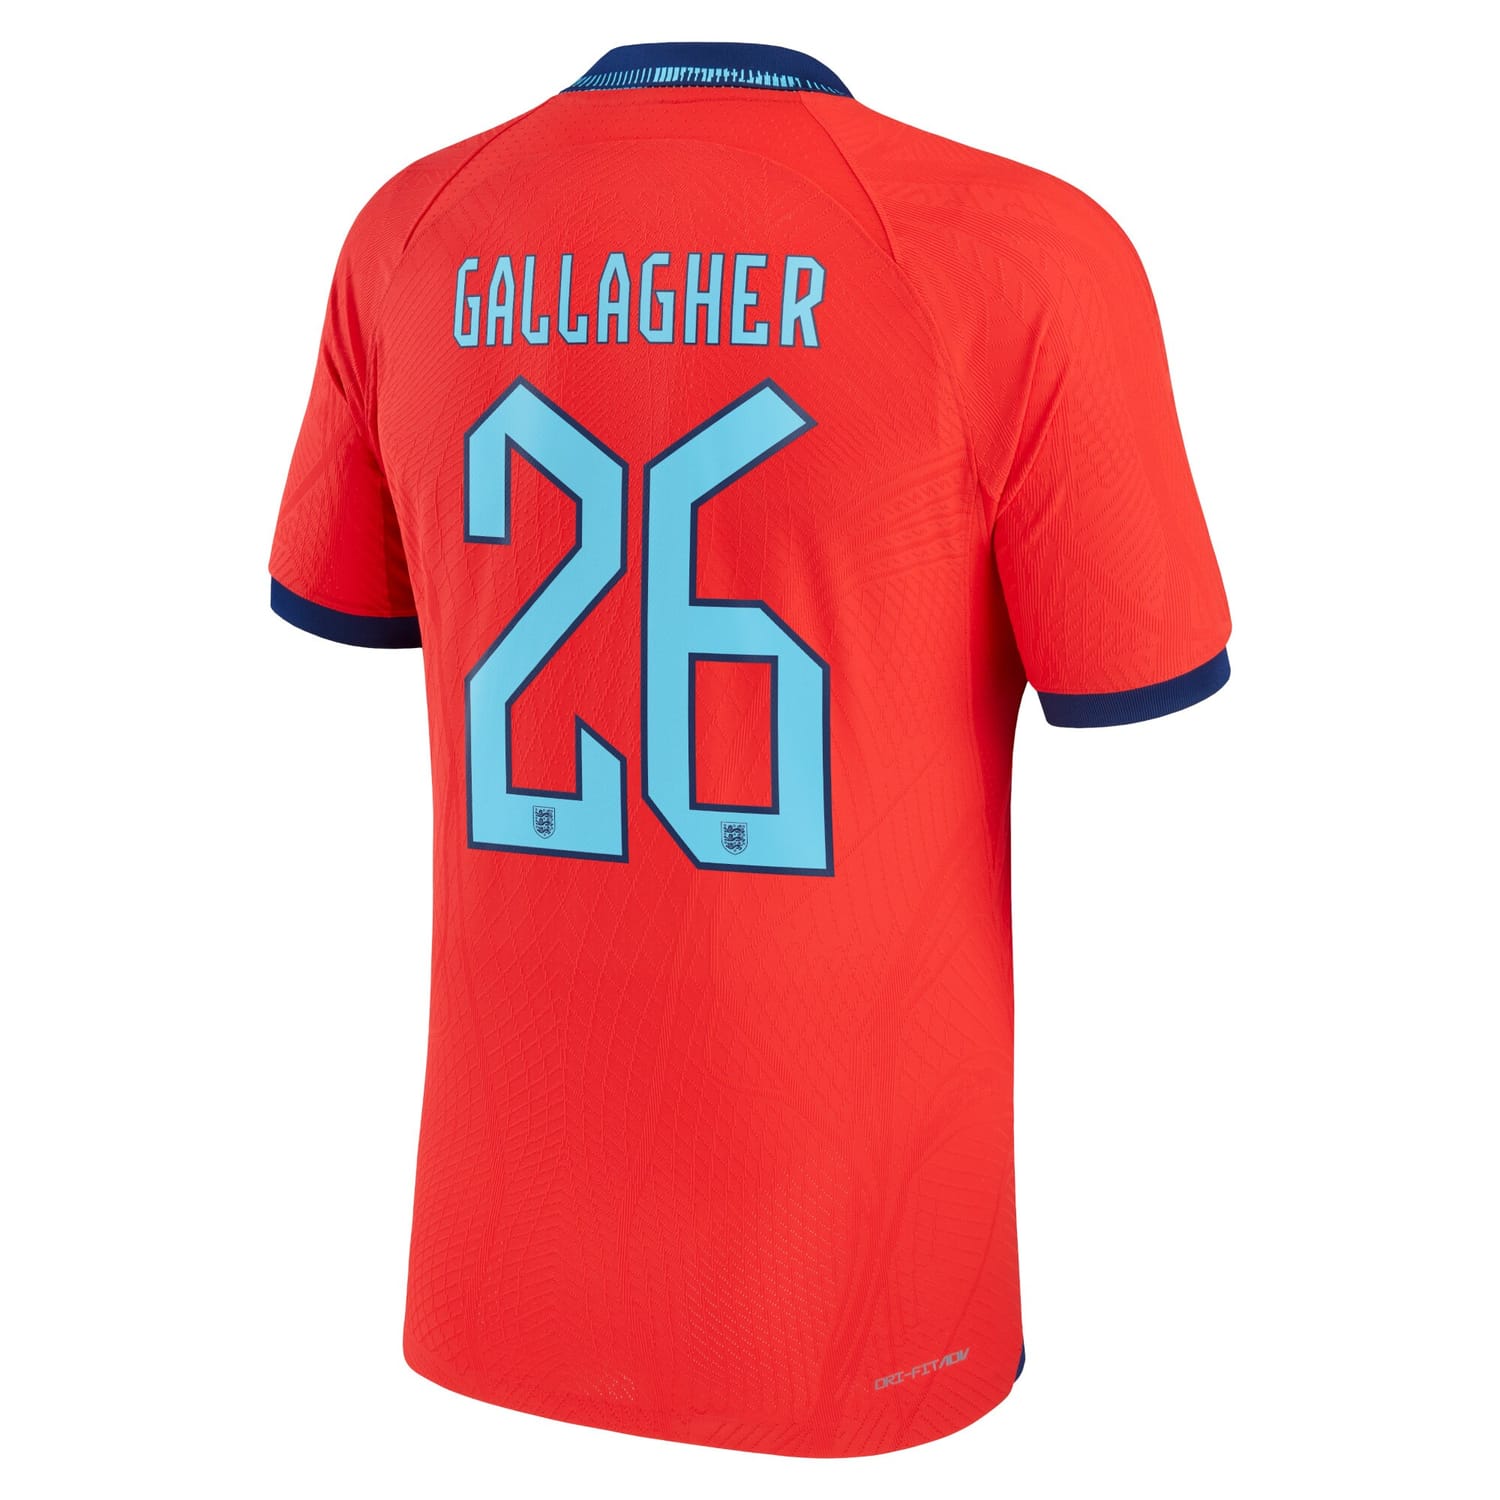 England National Team Away Authentic Jersey Shirt 2022 player Conor Gallagher 26 printing for Men